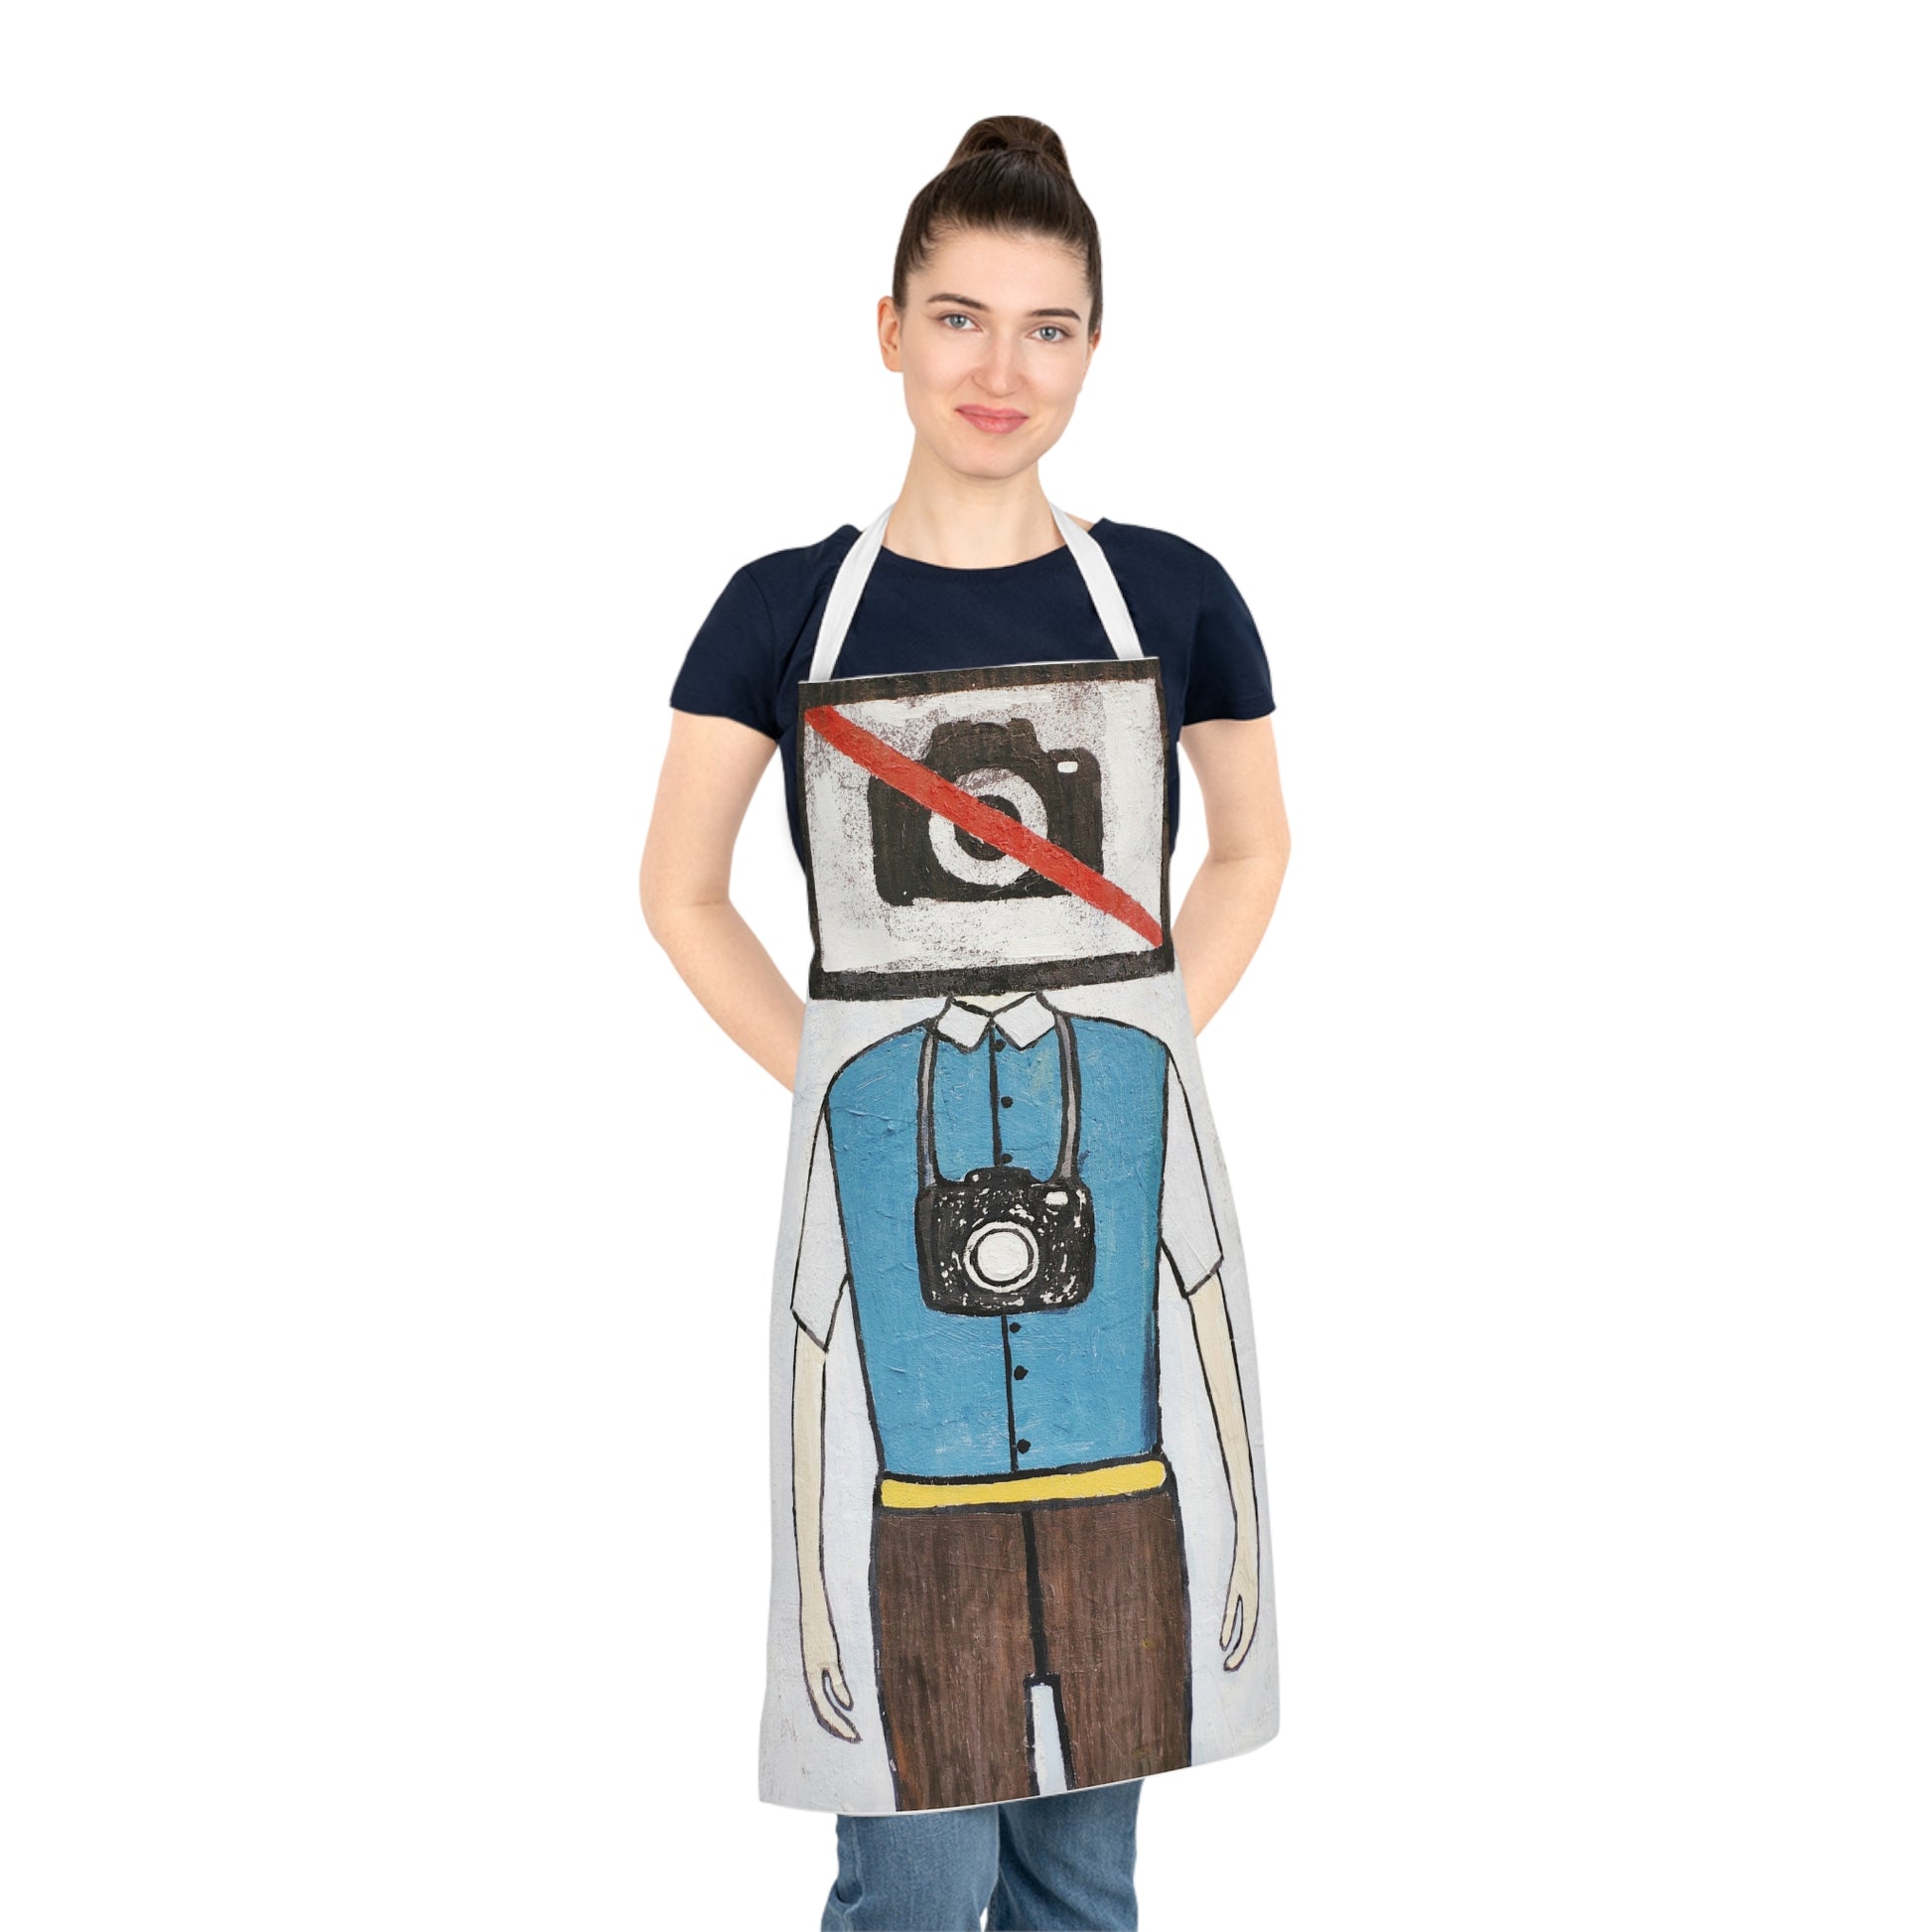 personalized aprons for men, personalised cooking apron, customized aprons for him, 